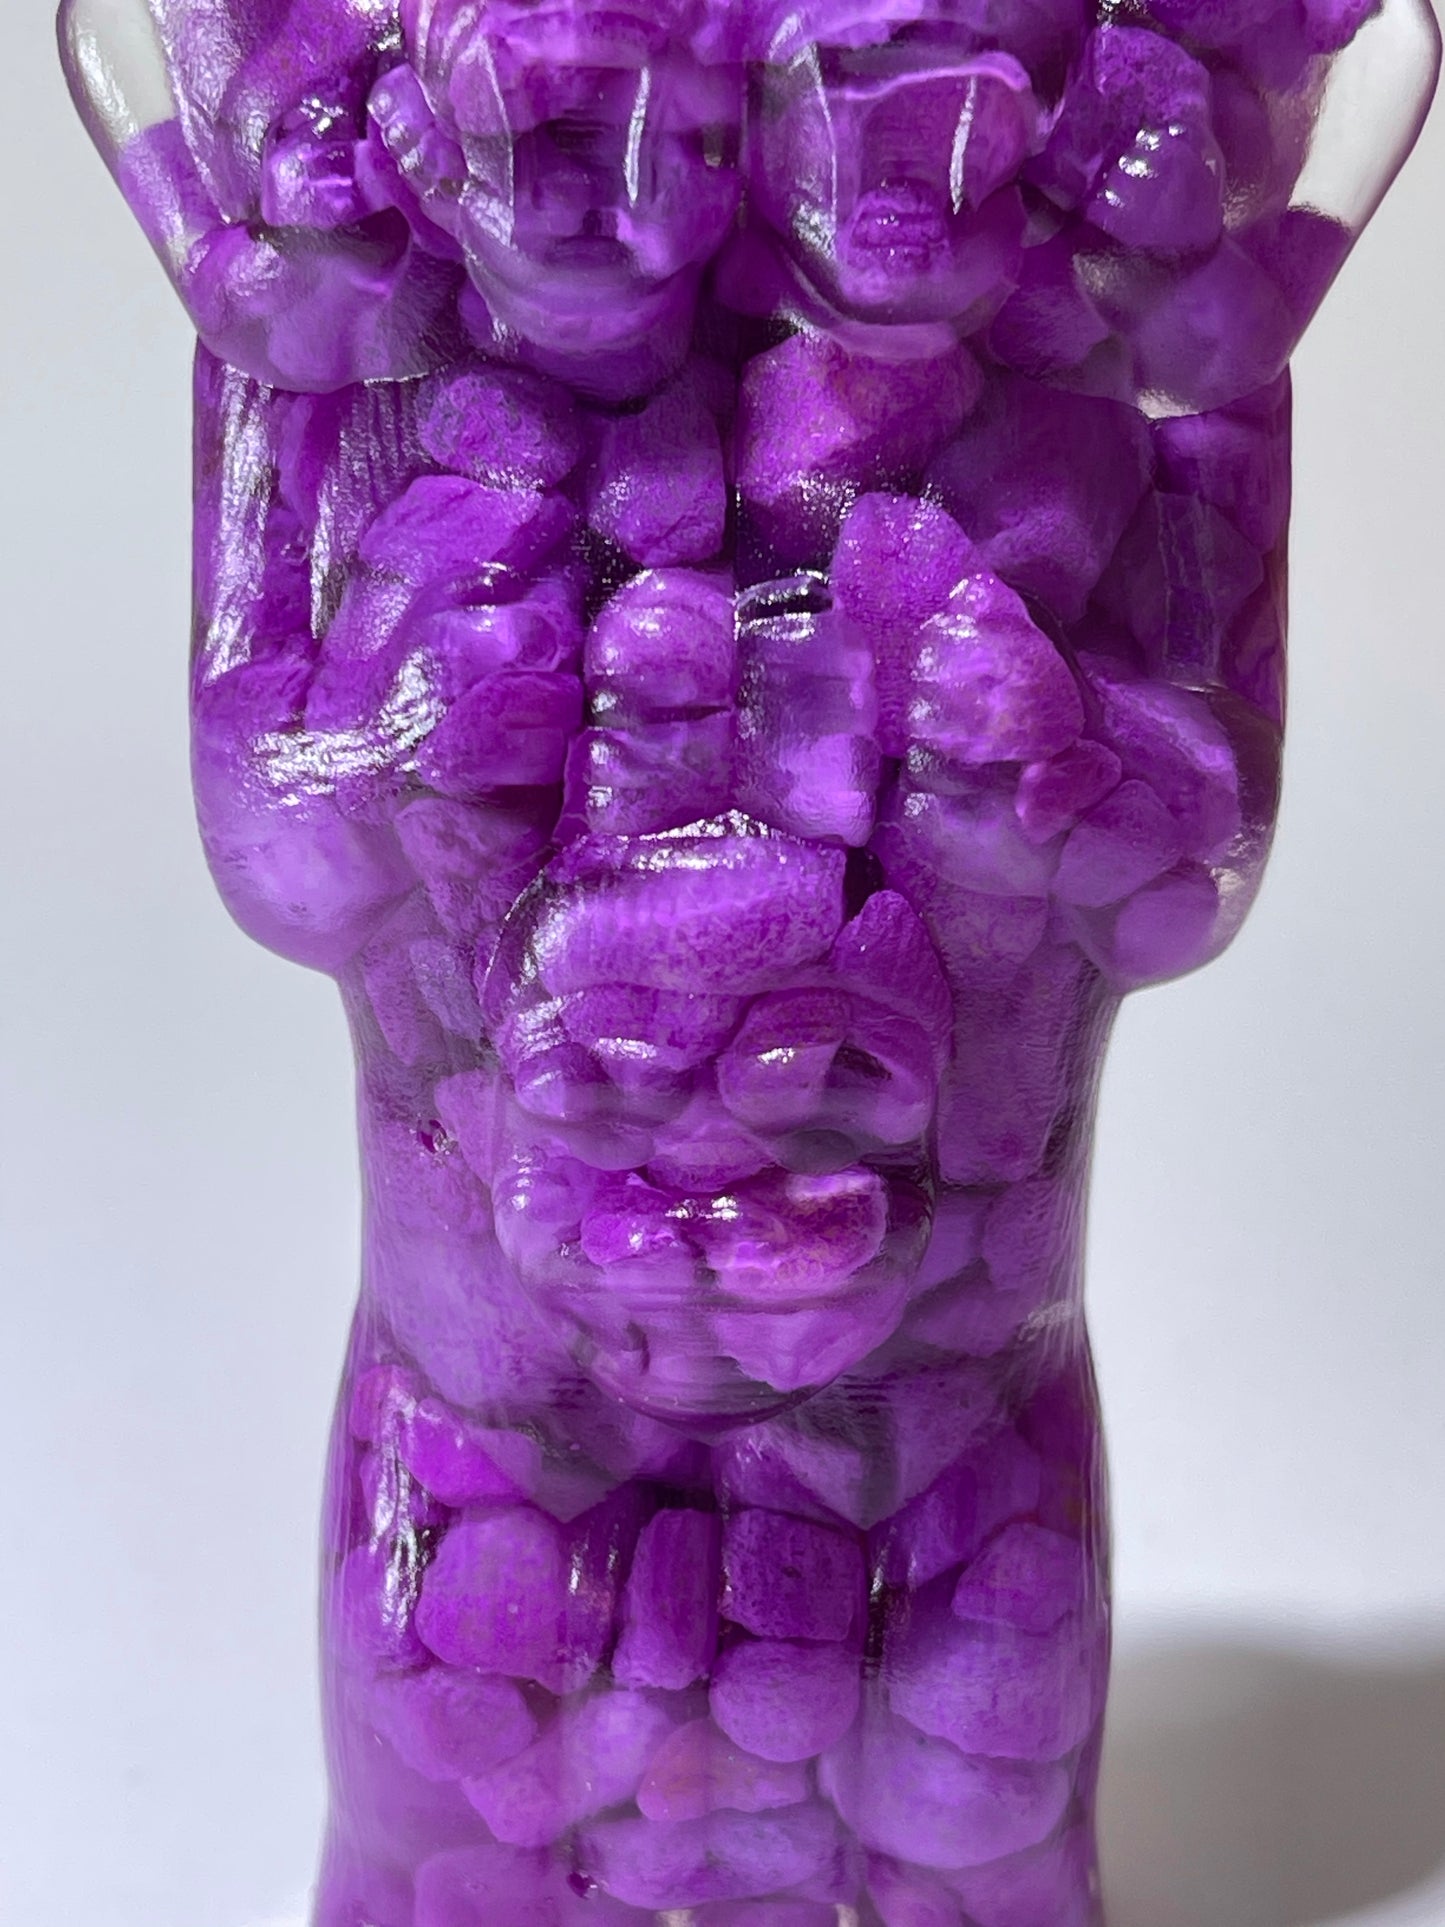 King Lord Ape: Resin Cast with Purple Stones